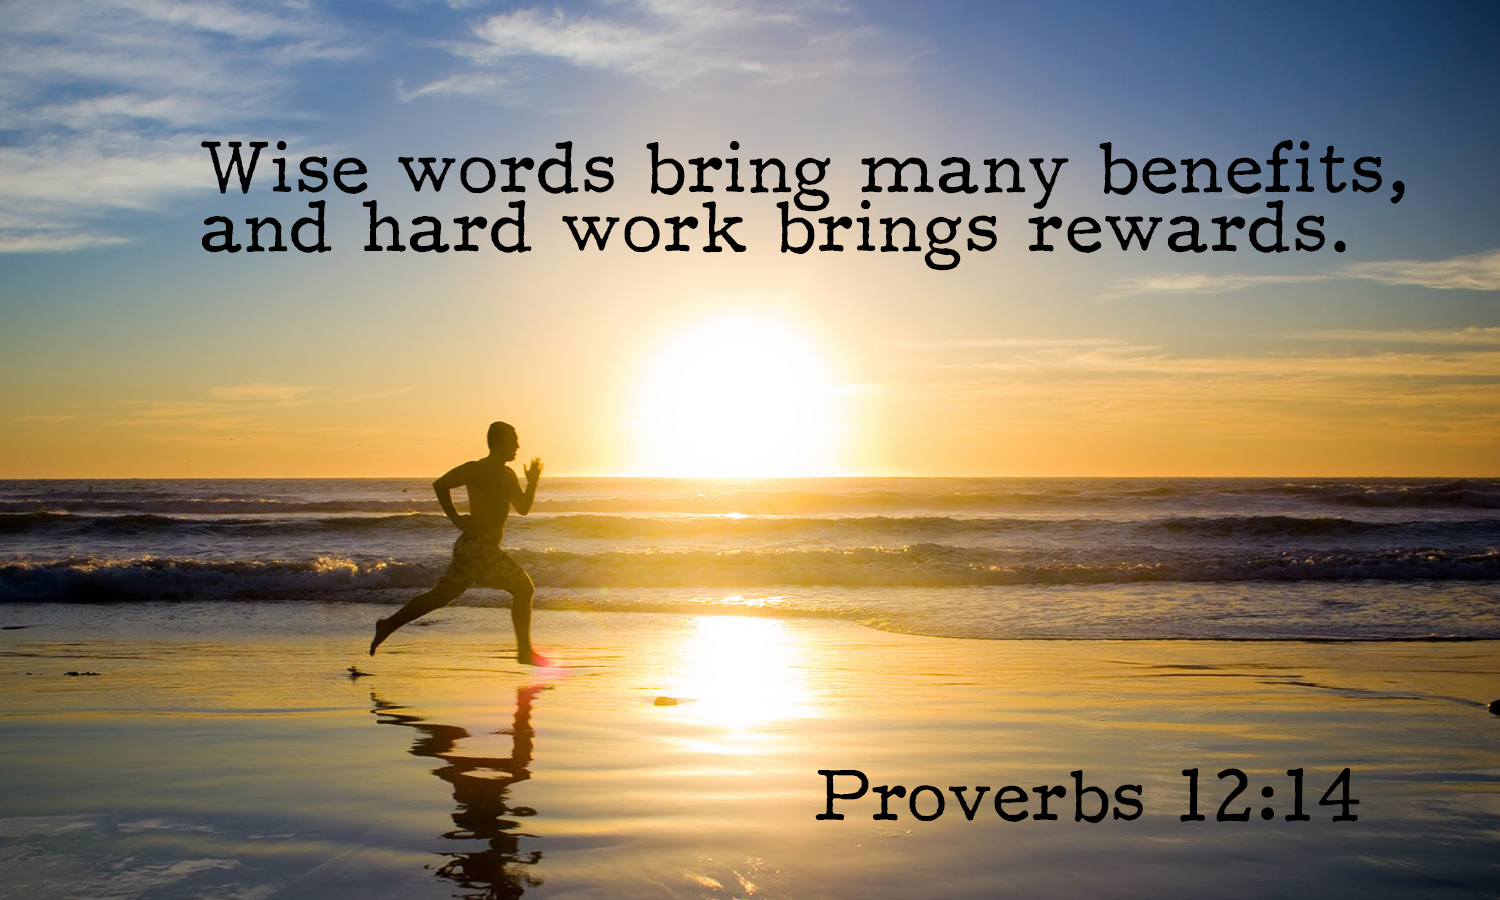 Proverbs 12:14

Wise words bring many benefits, and hard work brings rewards.